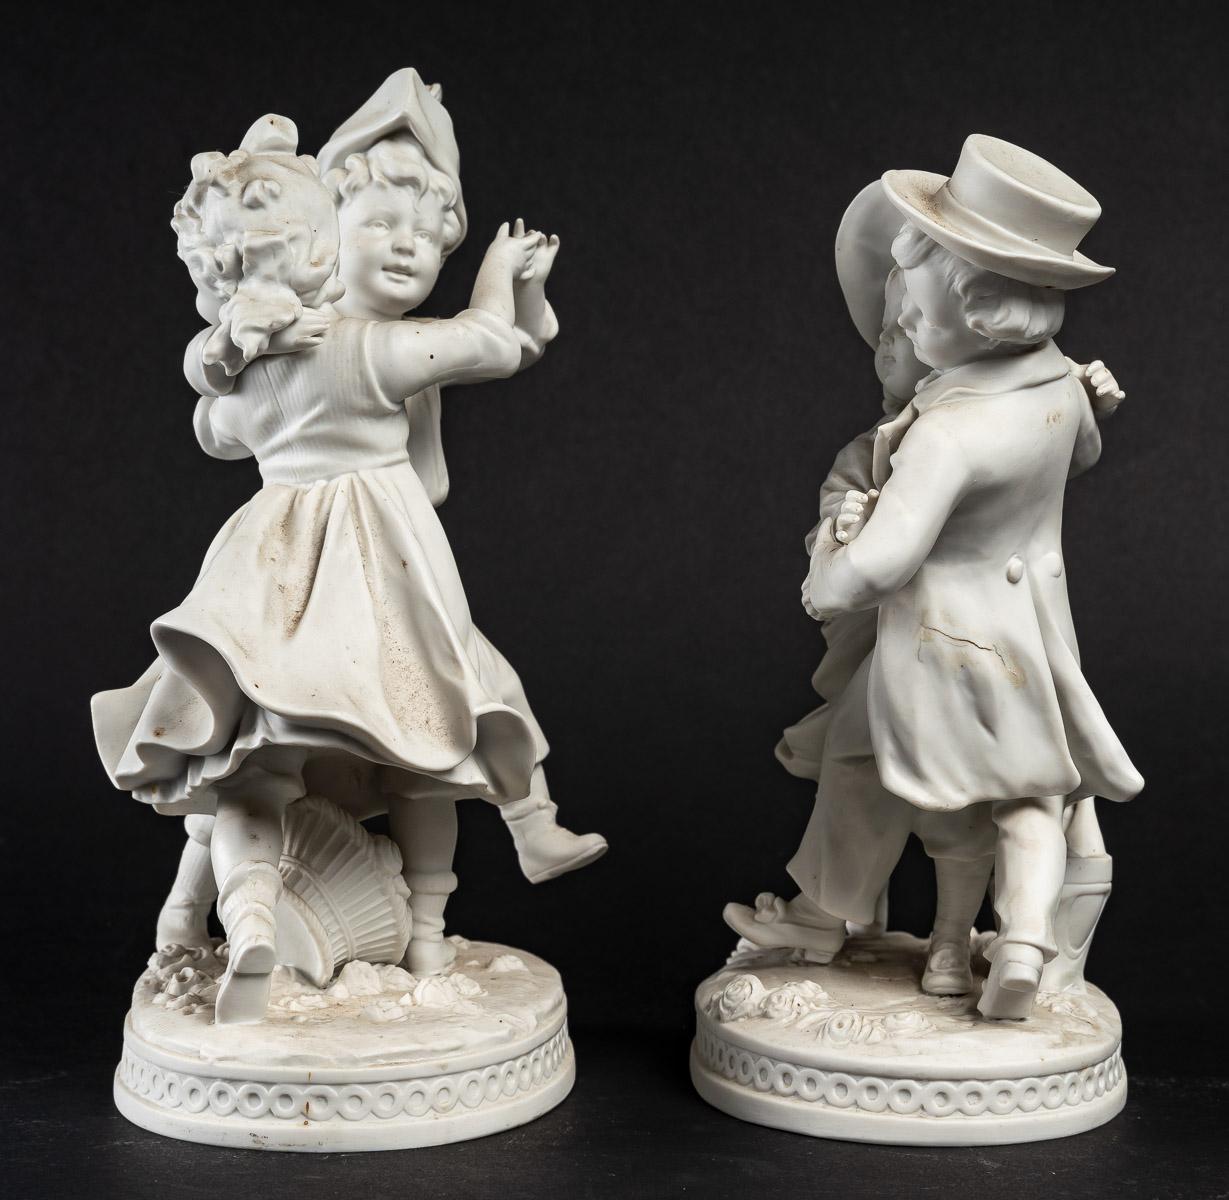 20th Century Pair of small Biscuit sculptures, early 20th century